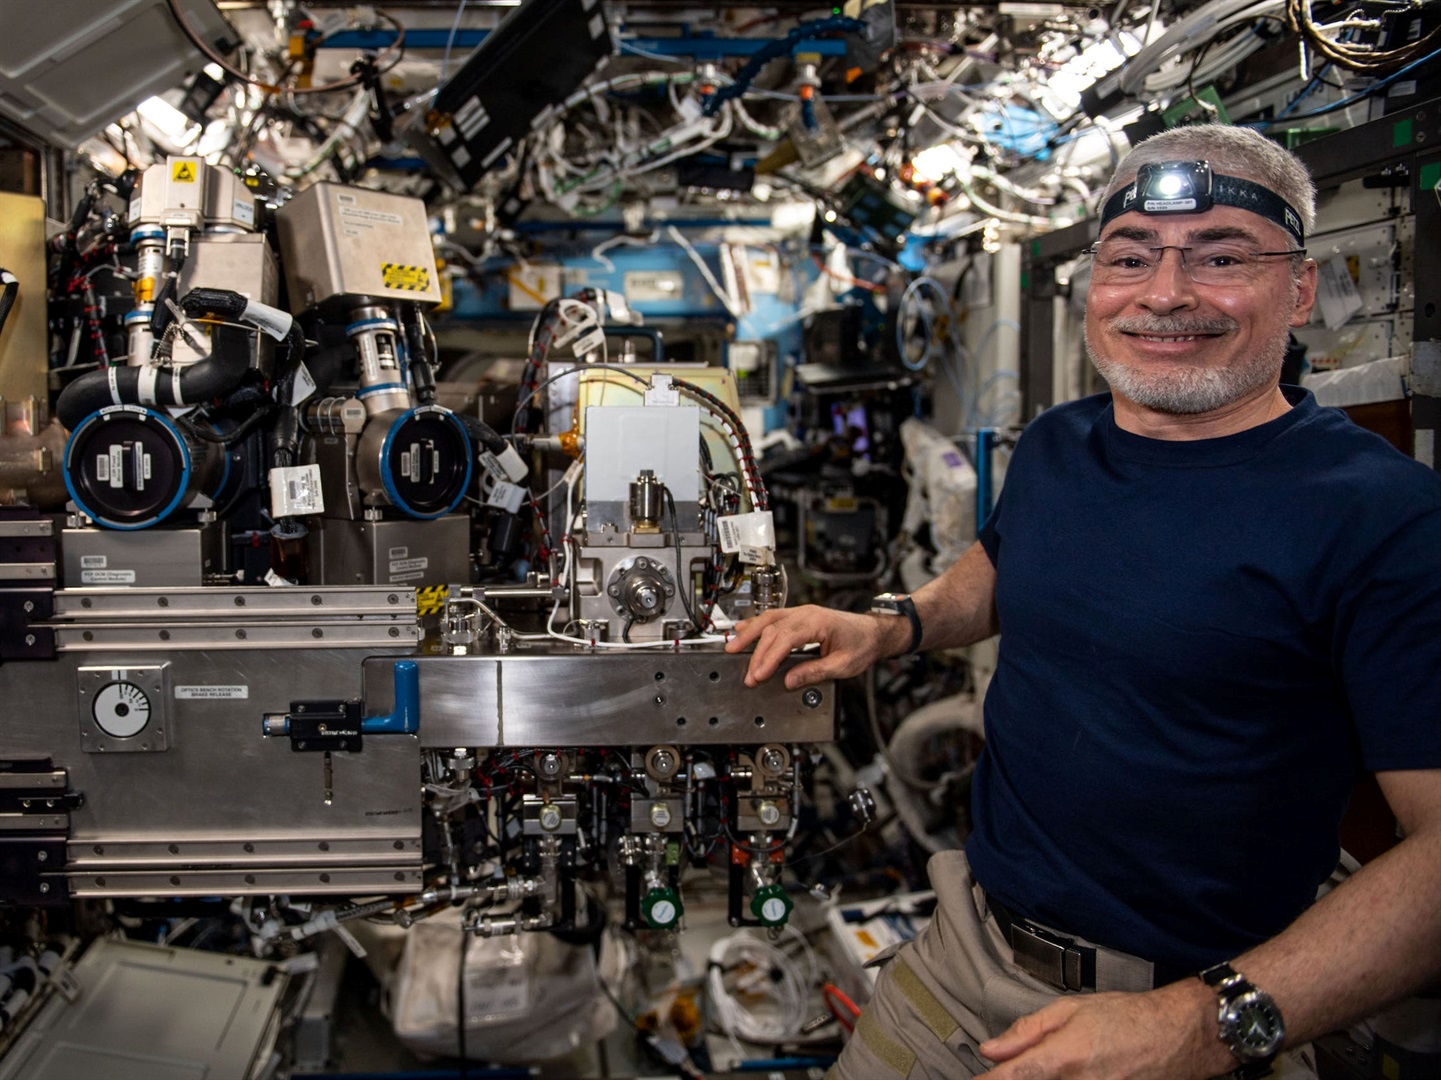 Mark Vande Hei works on a fire-safety experiment on the International Space Station, on February 10, 2022.